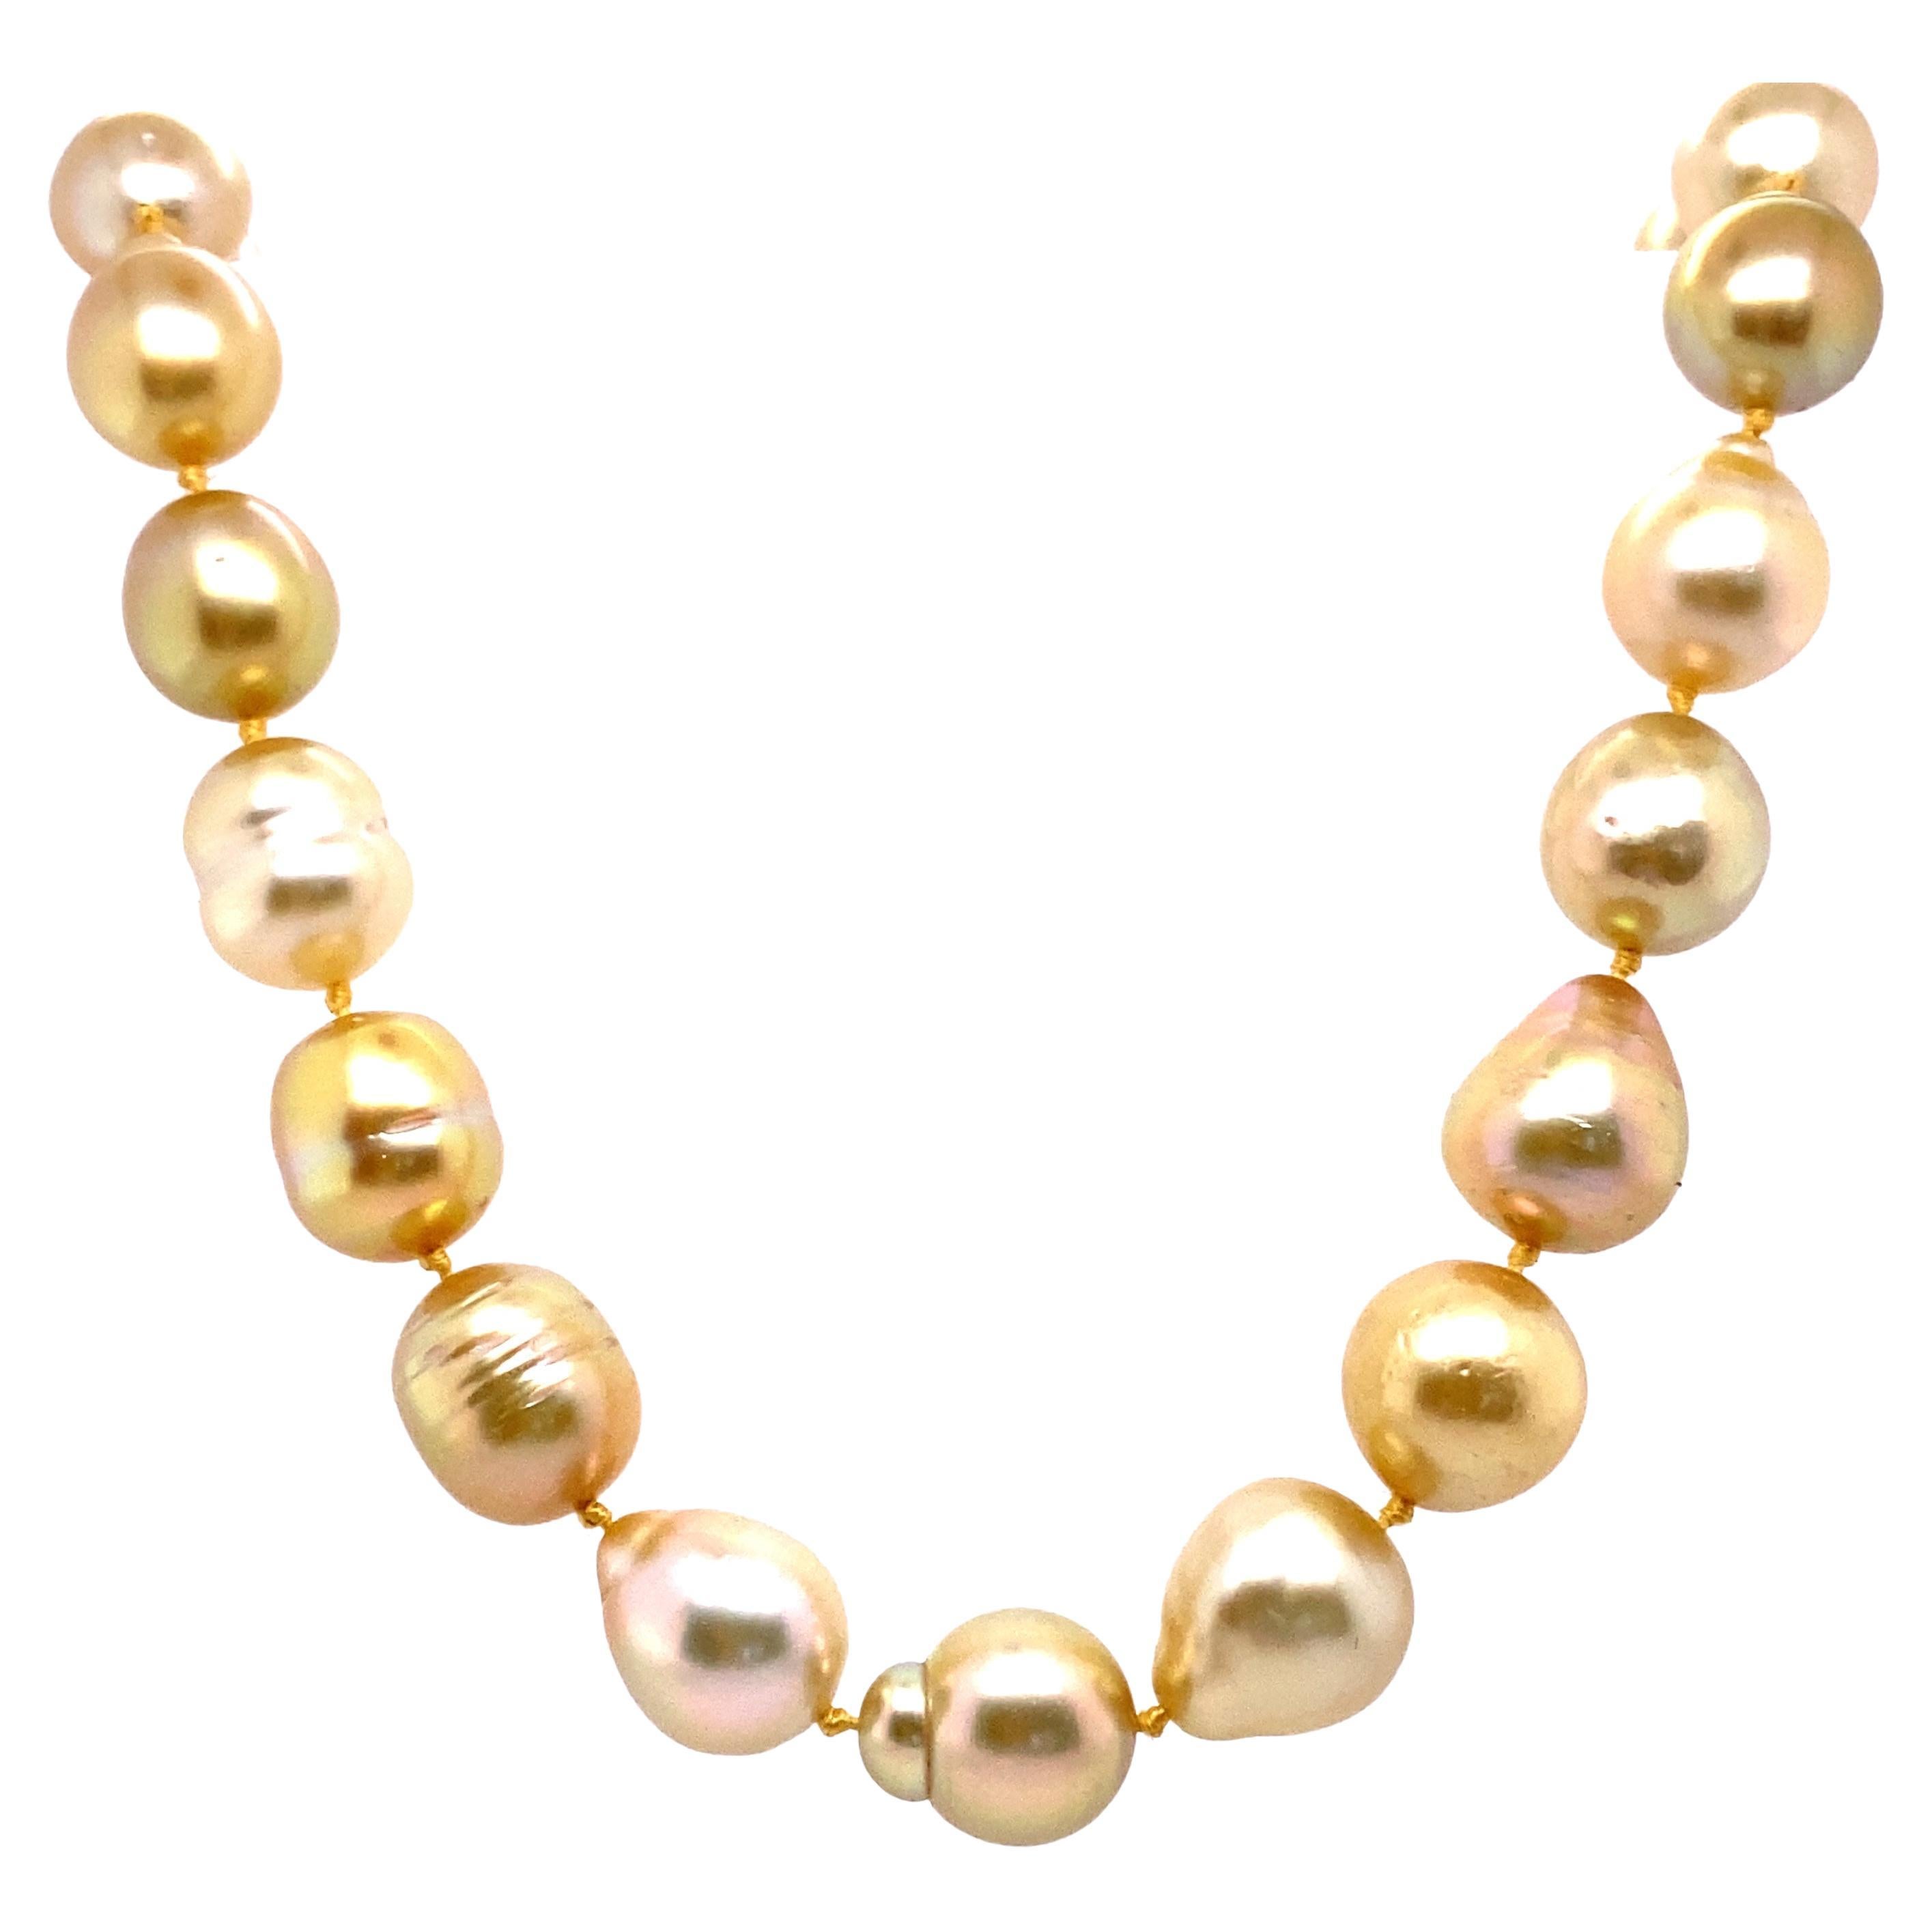 Natural, Golden Yellow Baroque Pearls Strand Necklace, 14K Gold Clasp